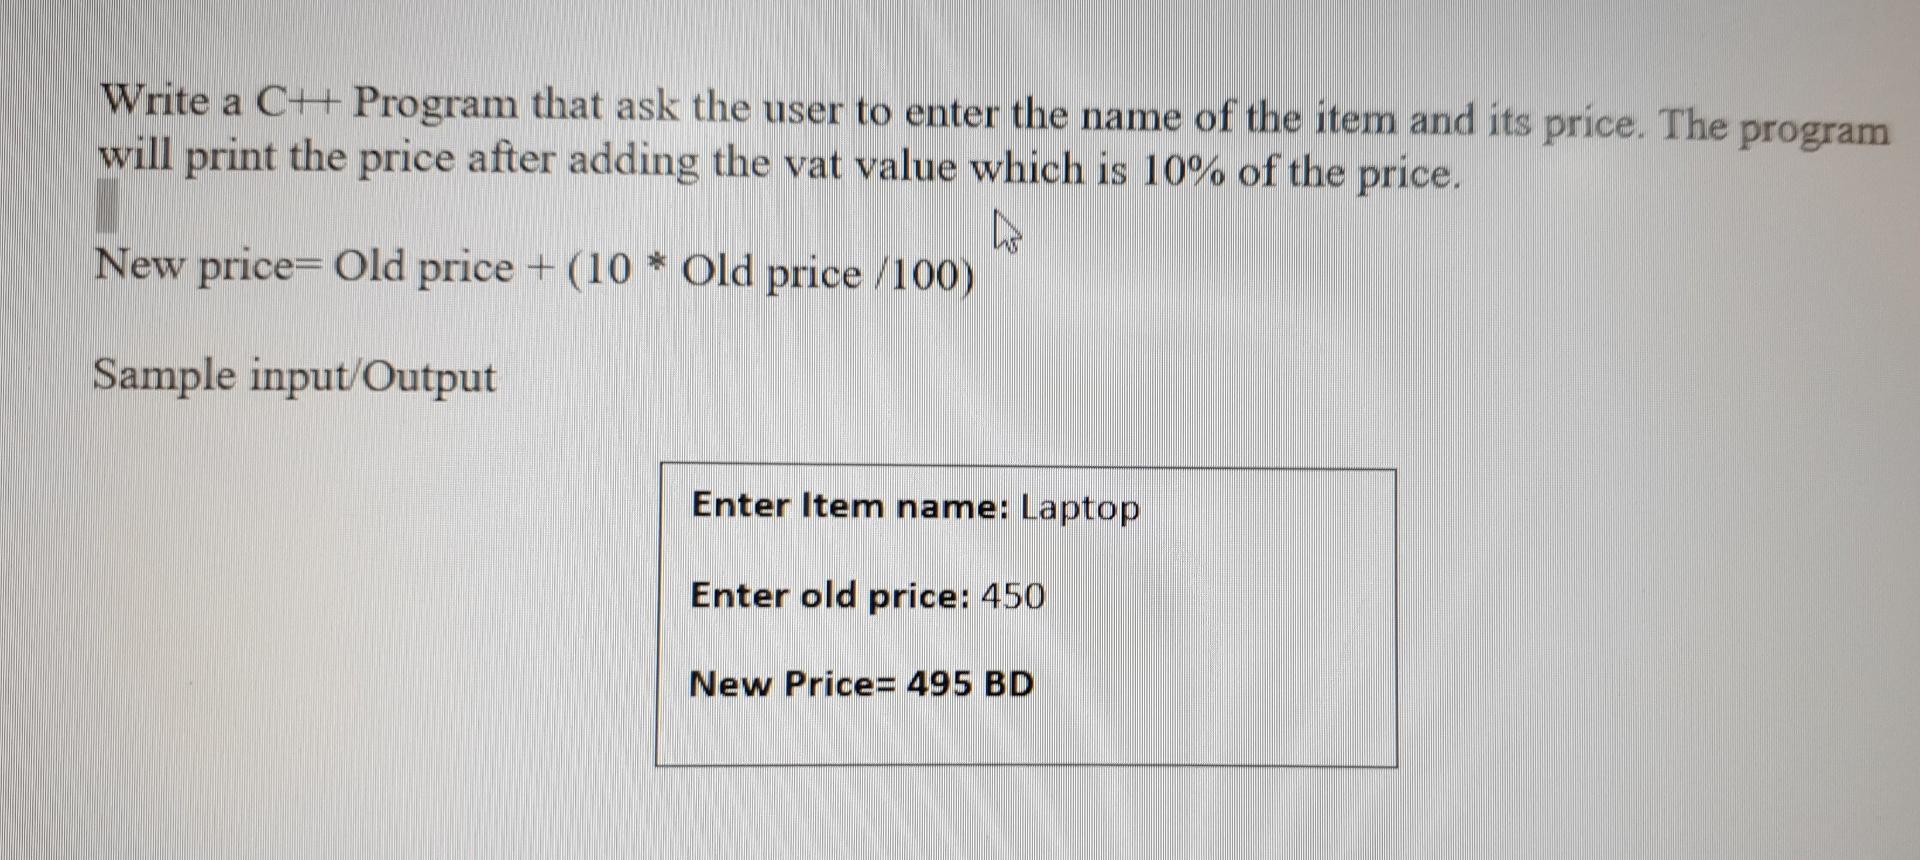 Write a C++ Program that ask the user to enter the name of the item and its price. The program will print the